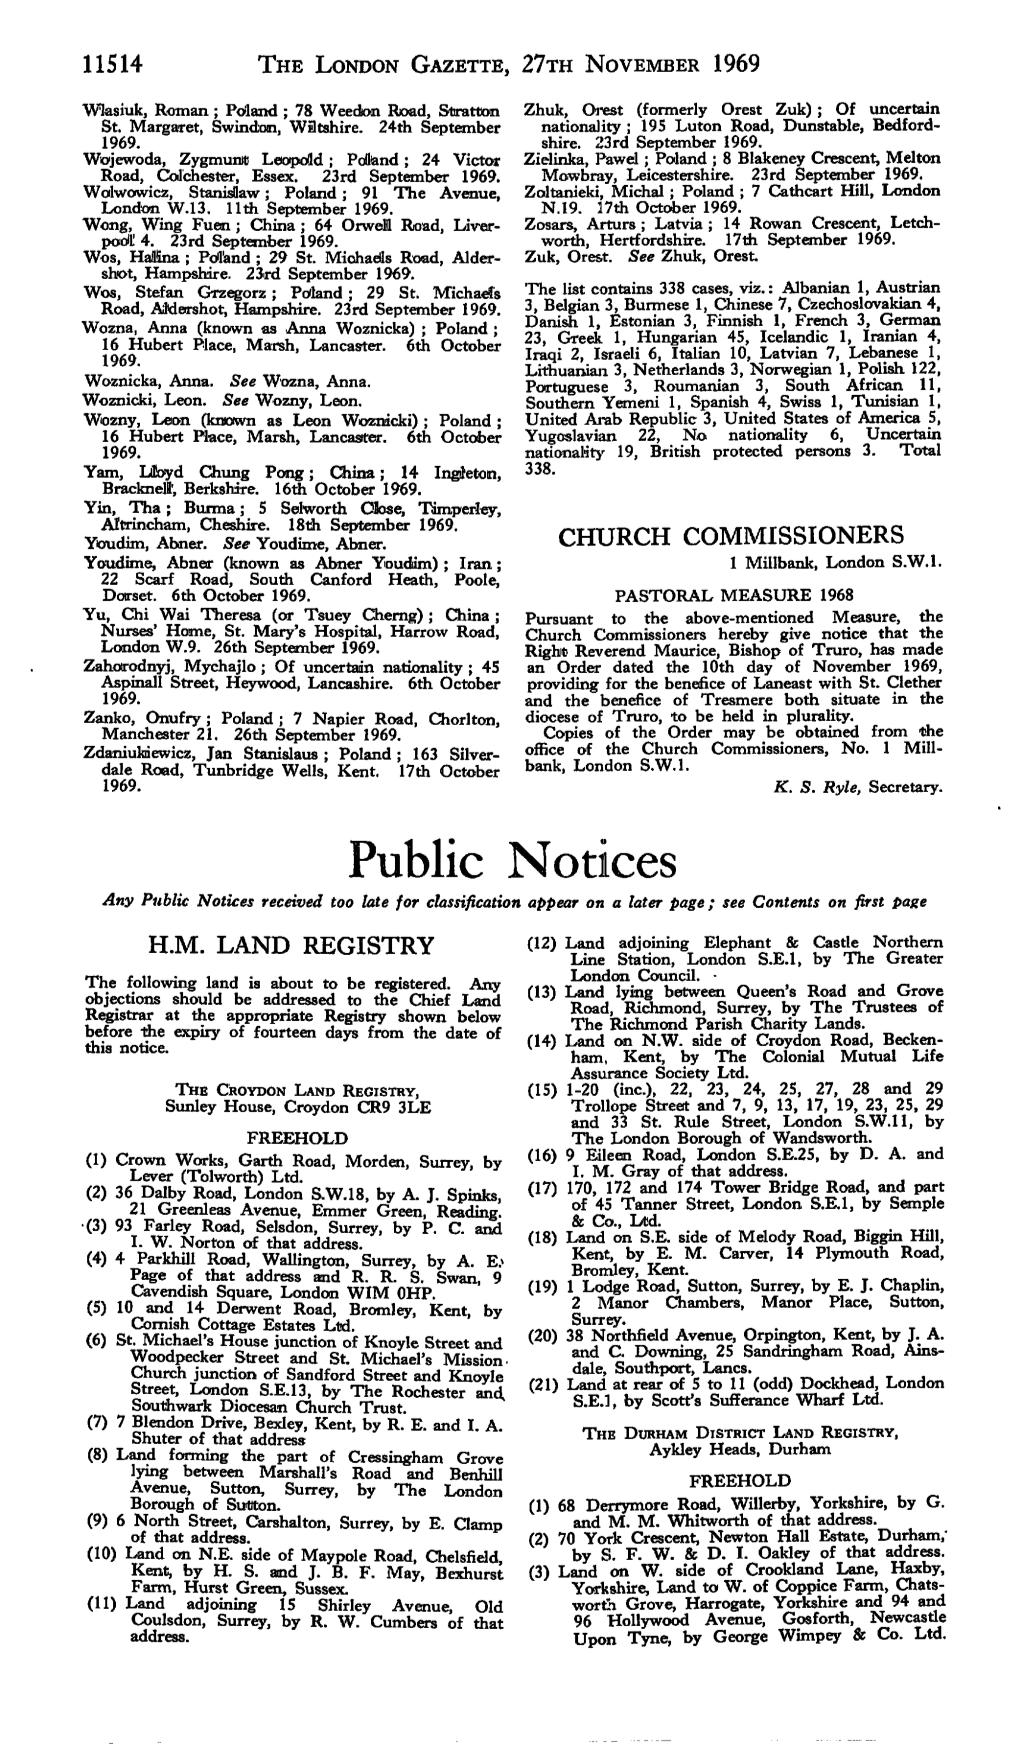 Public Notices Any Public Notices Received Too Late for Classification Appear on a Later Page; See Contents on First Page